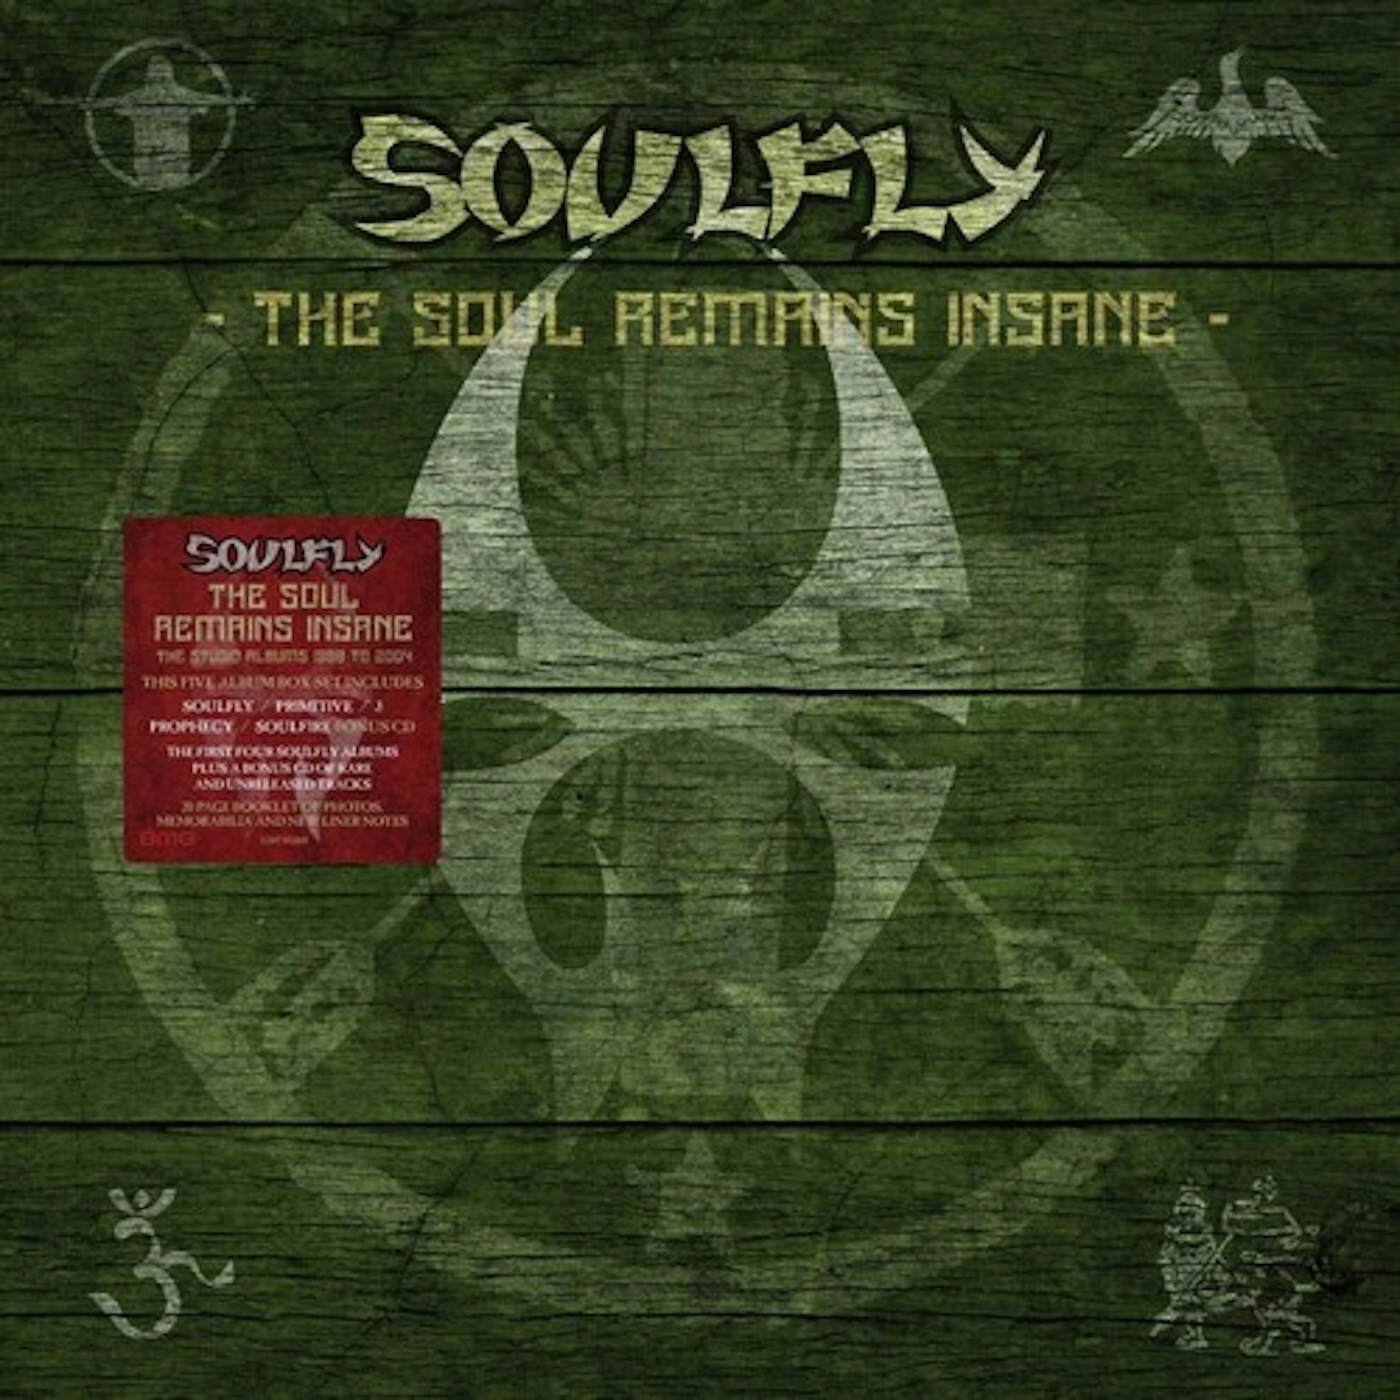 Soulfly SOUL REMAINS INSANE: STUDIO ALBUMS 1998 TO 2004 CD